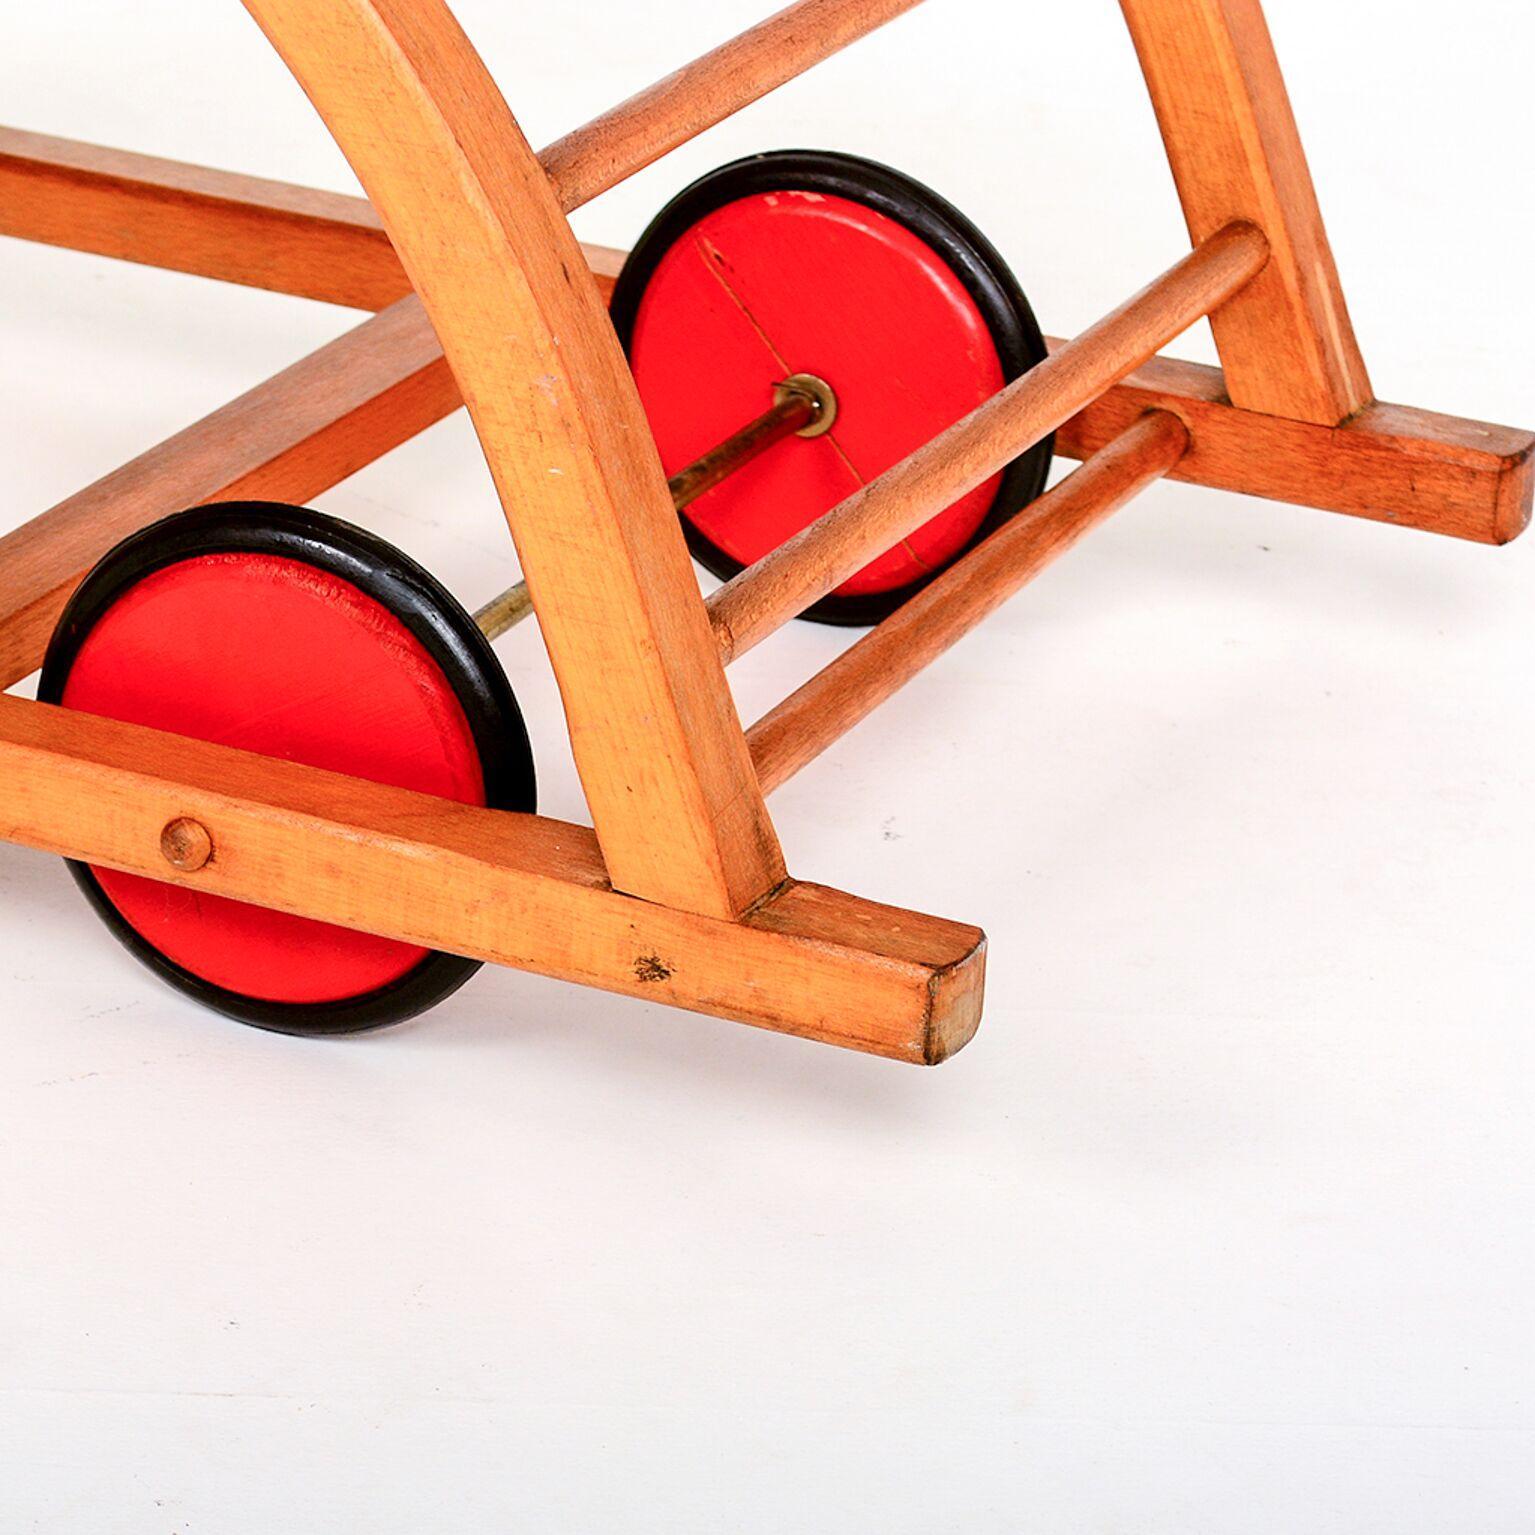 For your consideration a beautiful Mid-Century Modern Schaukelwagen rocking car toy wagon by Hans Brockhage and Erwin Andra. Made in early 1950s. Iconic midcentury design for kids. Beechwood frame, curved plywood seating and red wooden wheels with